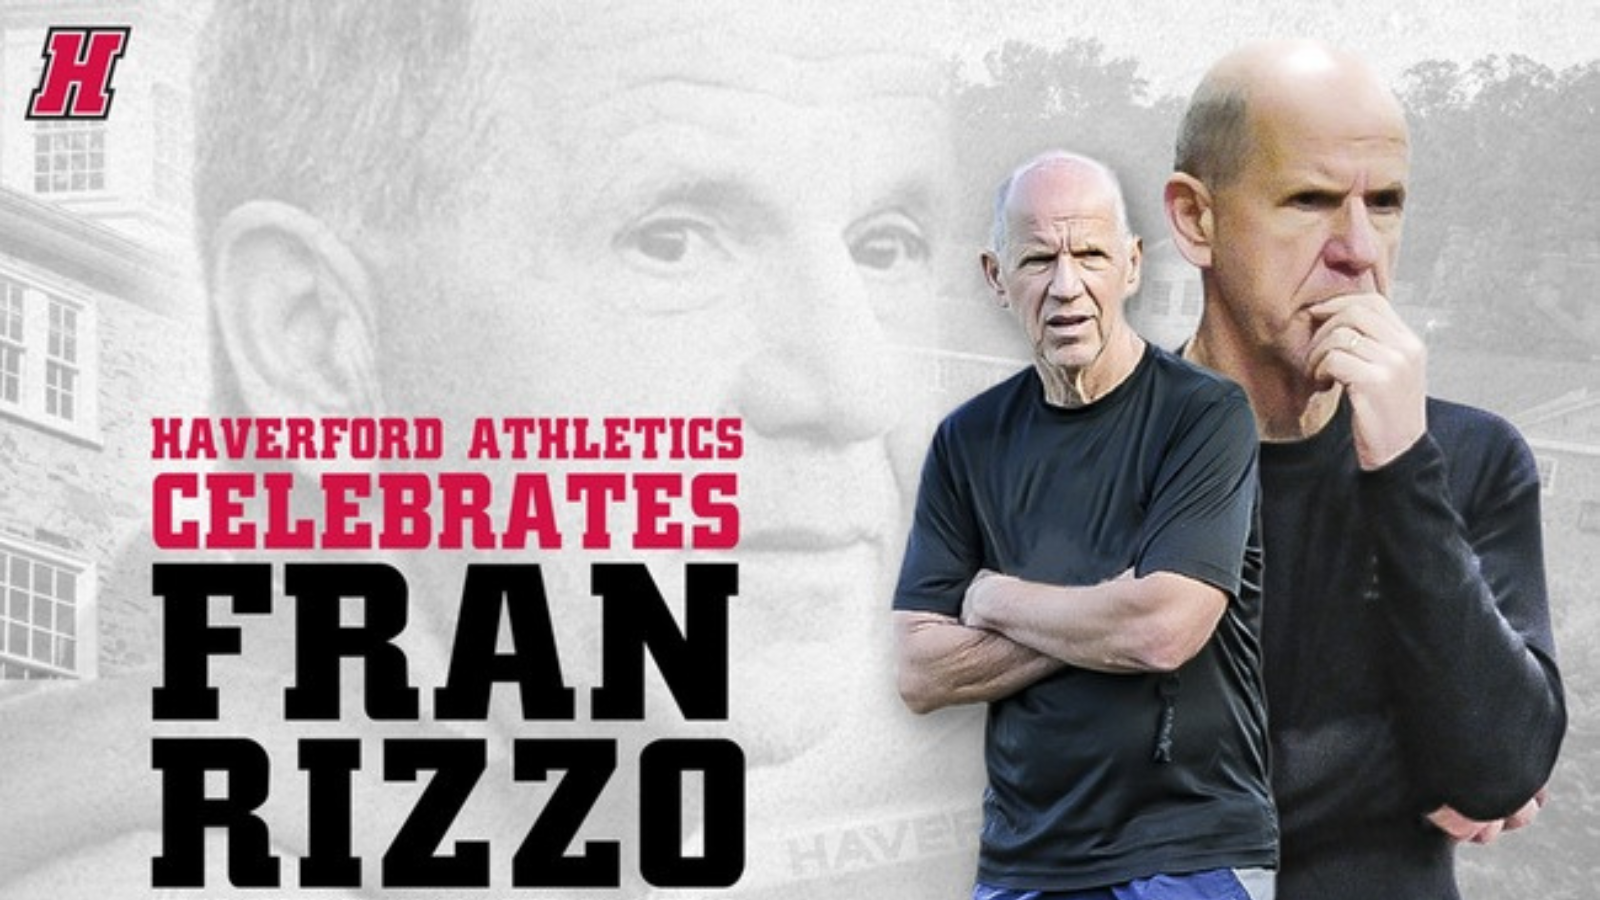 Legendary Haverford Women's Cross Country/Track & Field Coach Fran Rizzo Retires